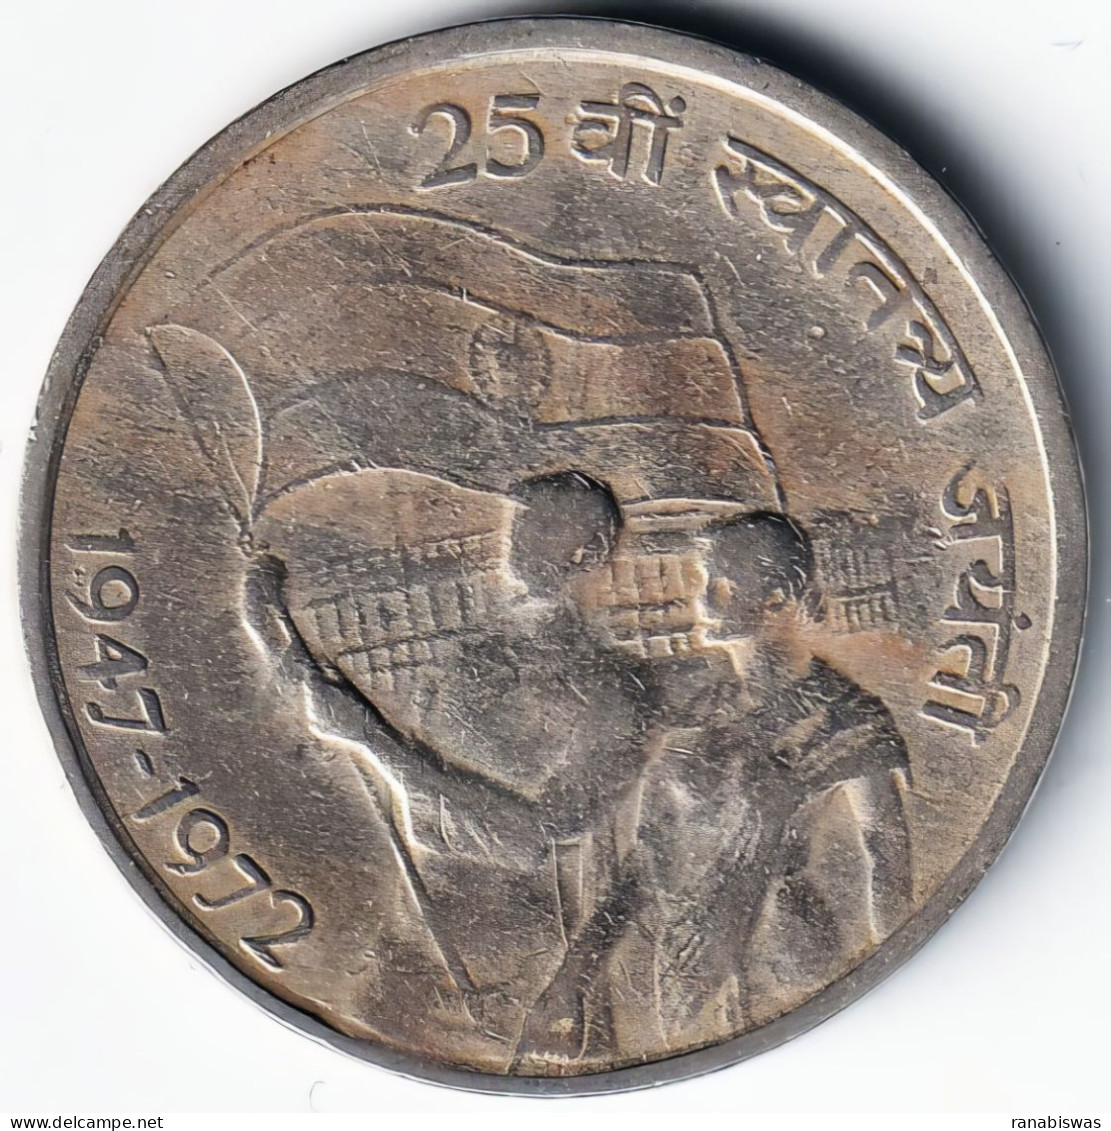 INDIA COIN LOT 102, 50 PAISE 1972, INDEPENDENCE, CALCITTA MINT, XF - Indien